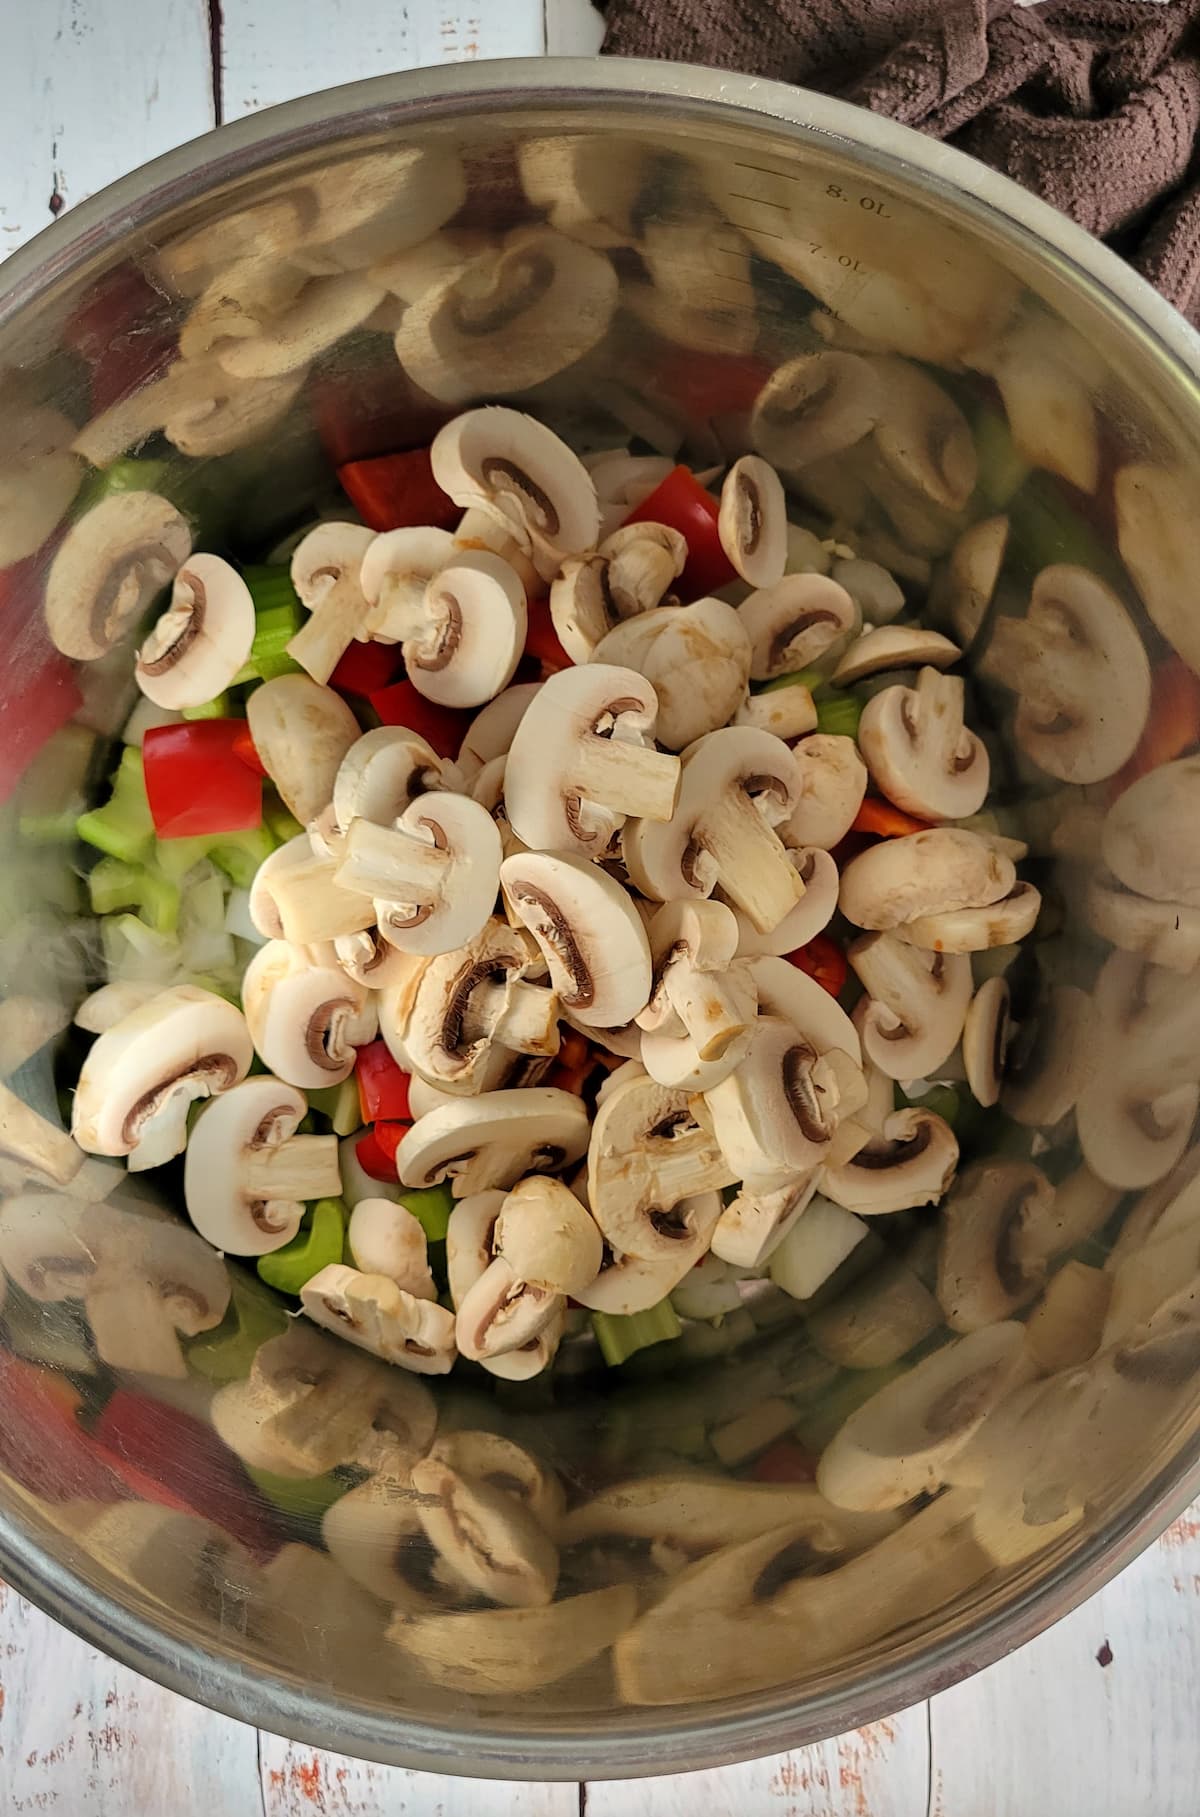 sliced mushrooms and other veggies in a pot